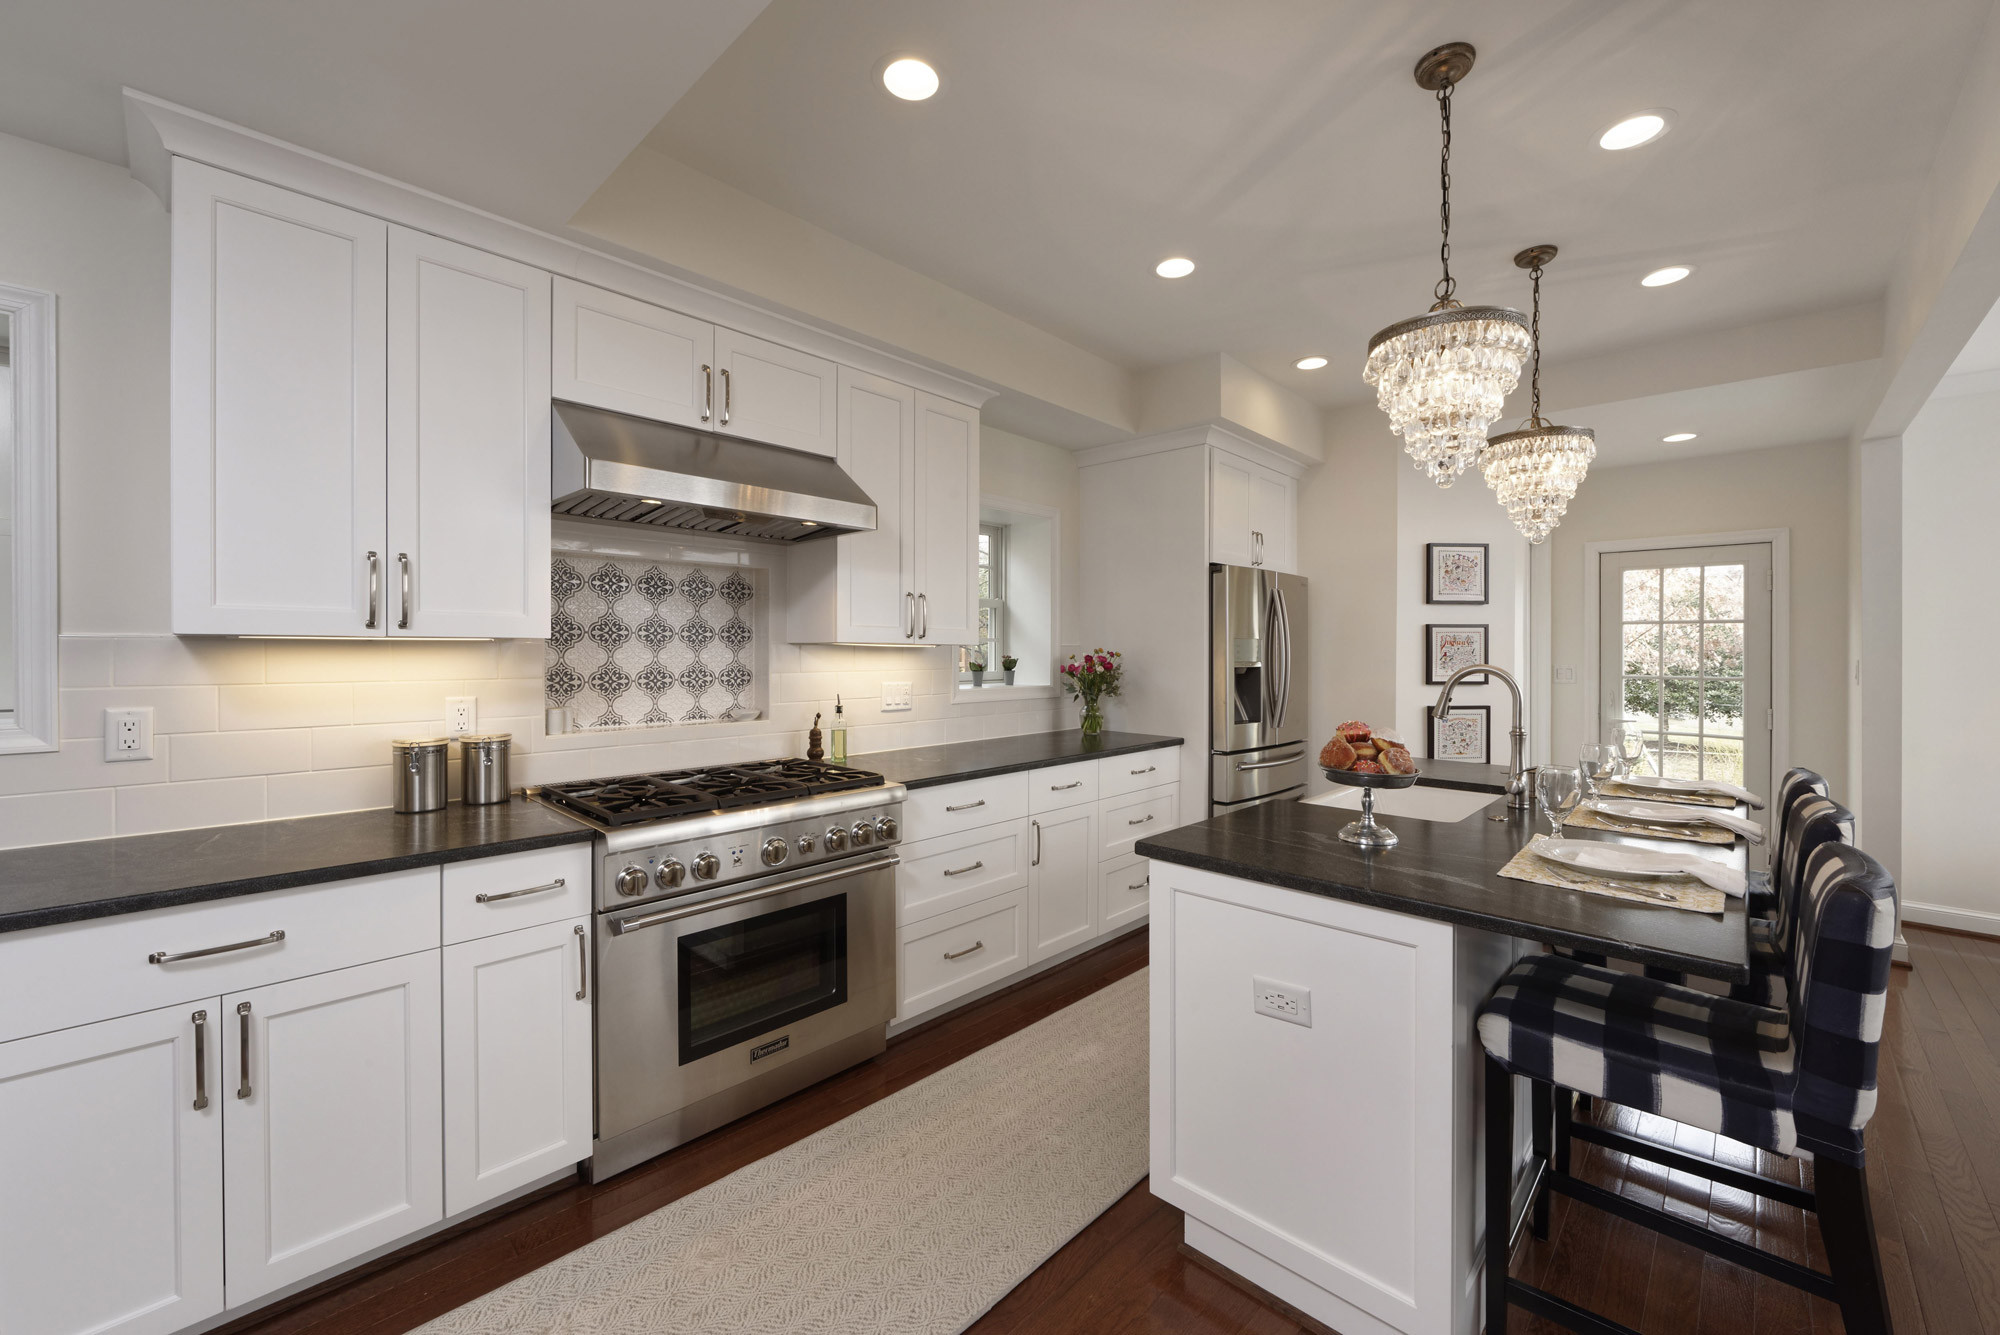 Cost Of A Kitchen Remodel
 Average Kitchen Remodel Costs in DC Metro Area